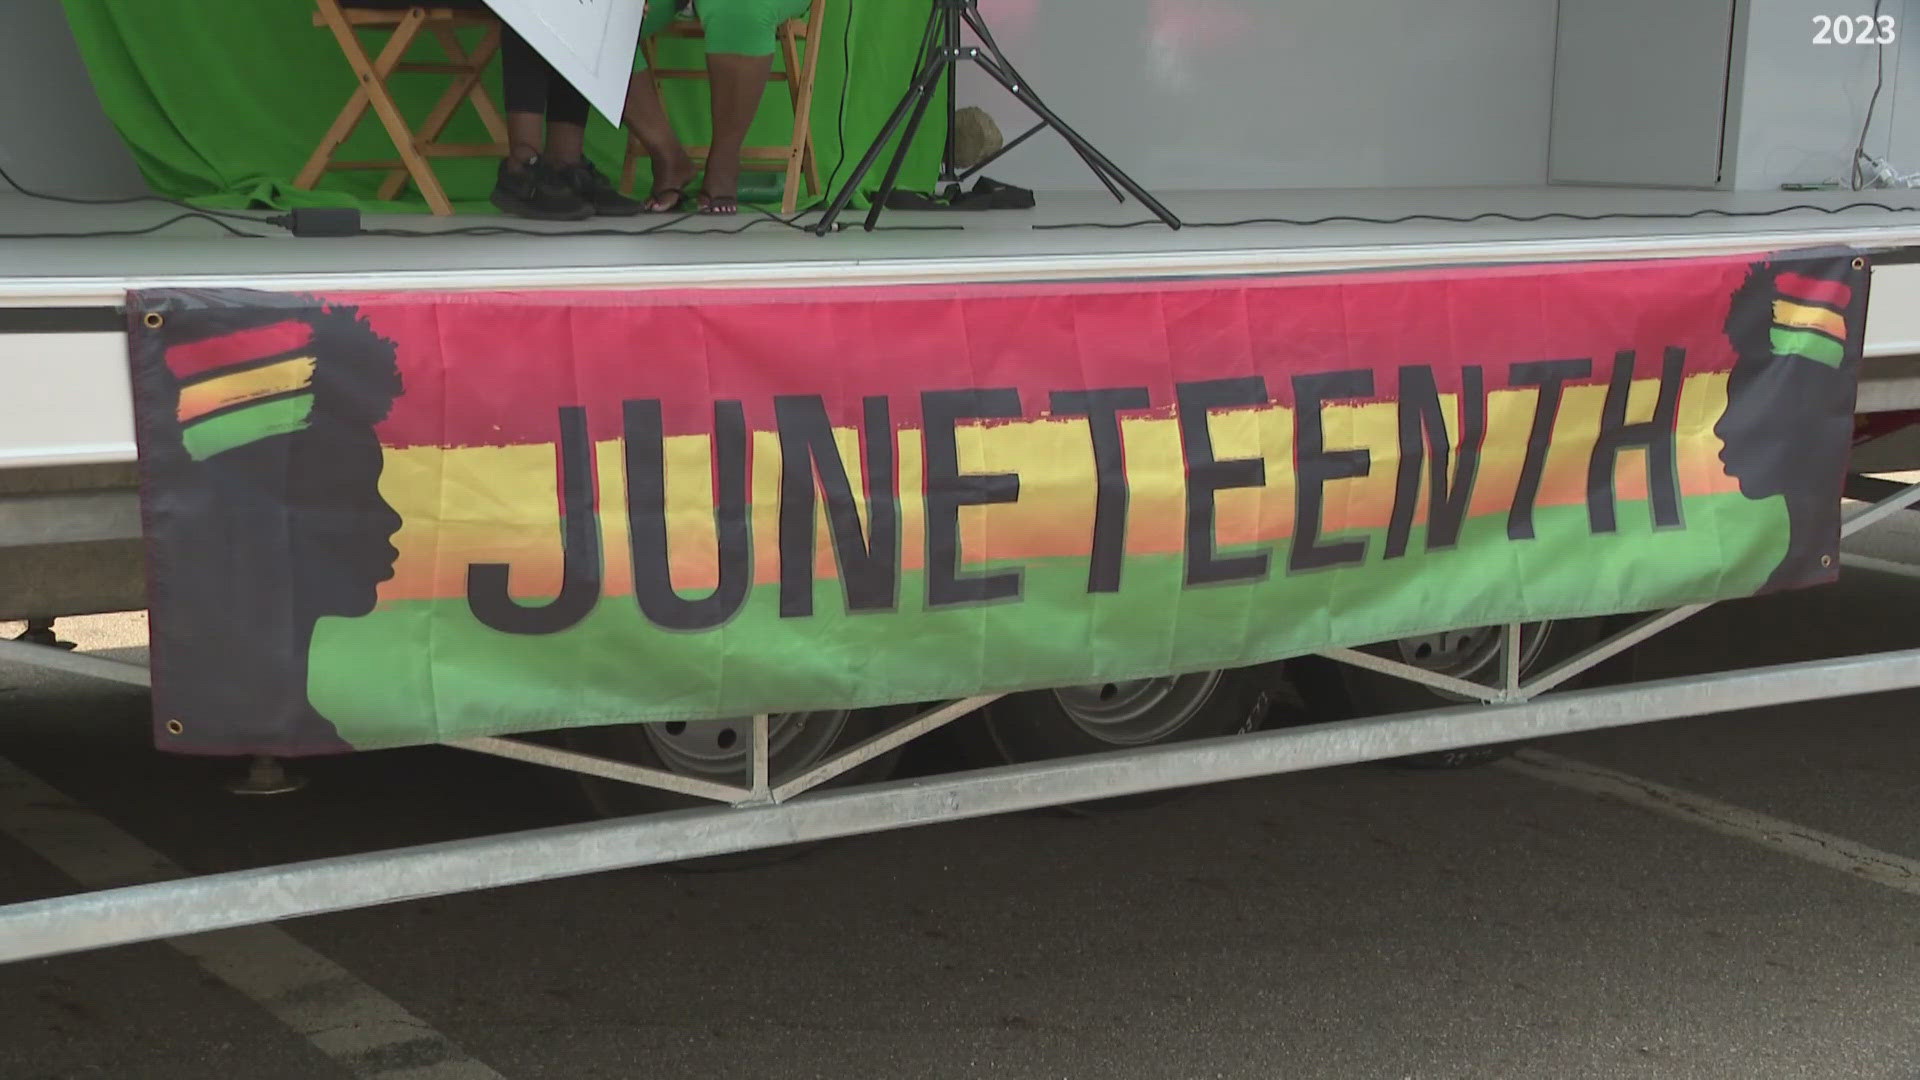 The Juneteenth event, in partnership with the Akron Urban League, will take place on Wednesday, June 19, from 1-7 p.m. at the John S. Knight Center in Akron.